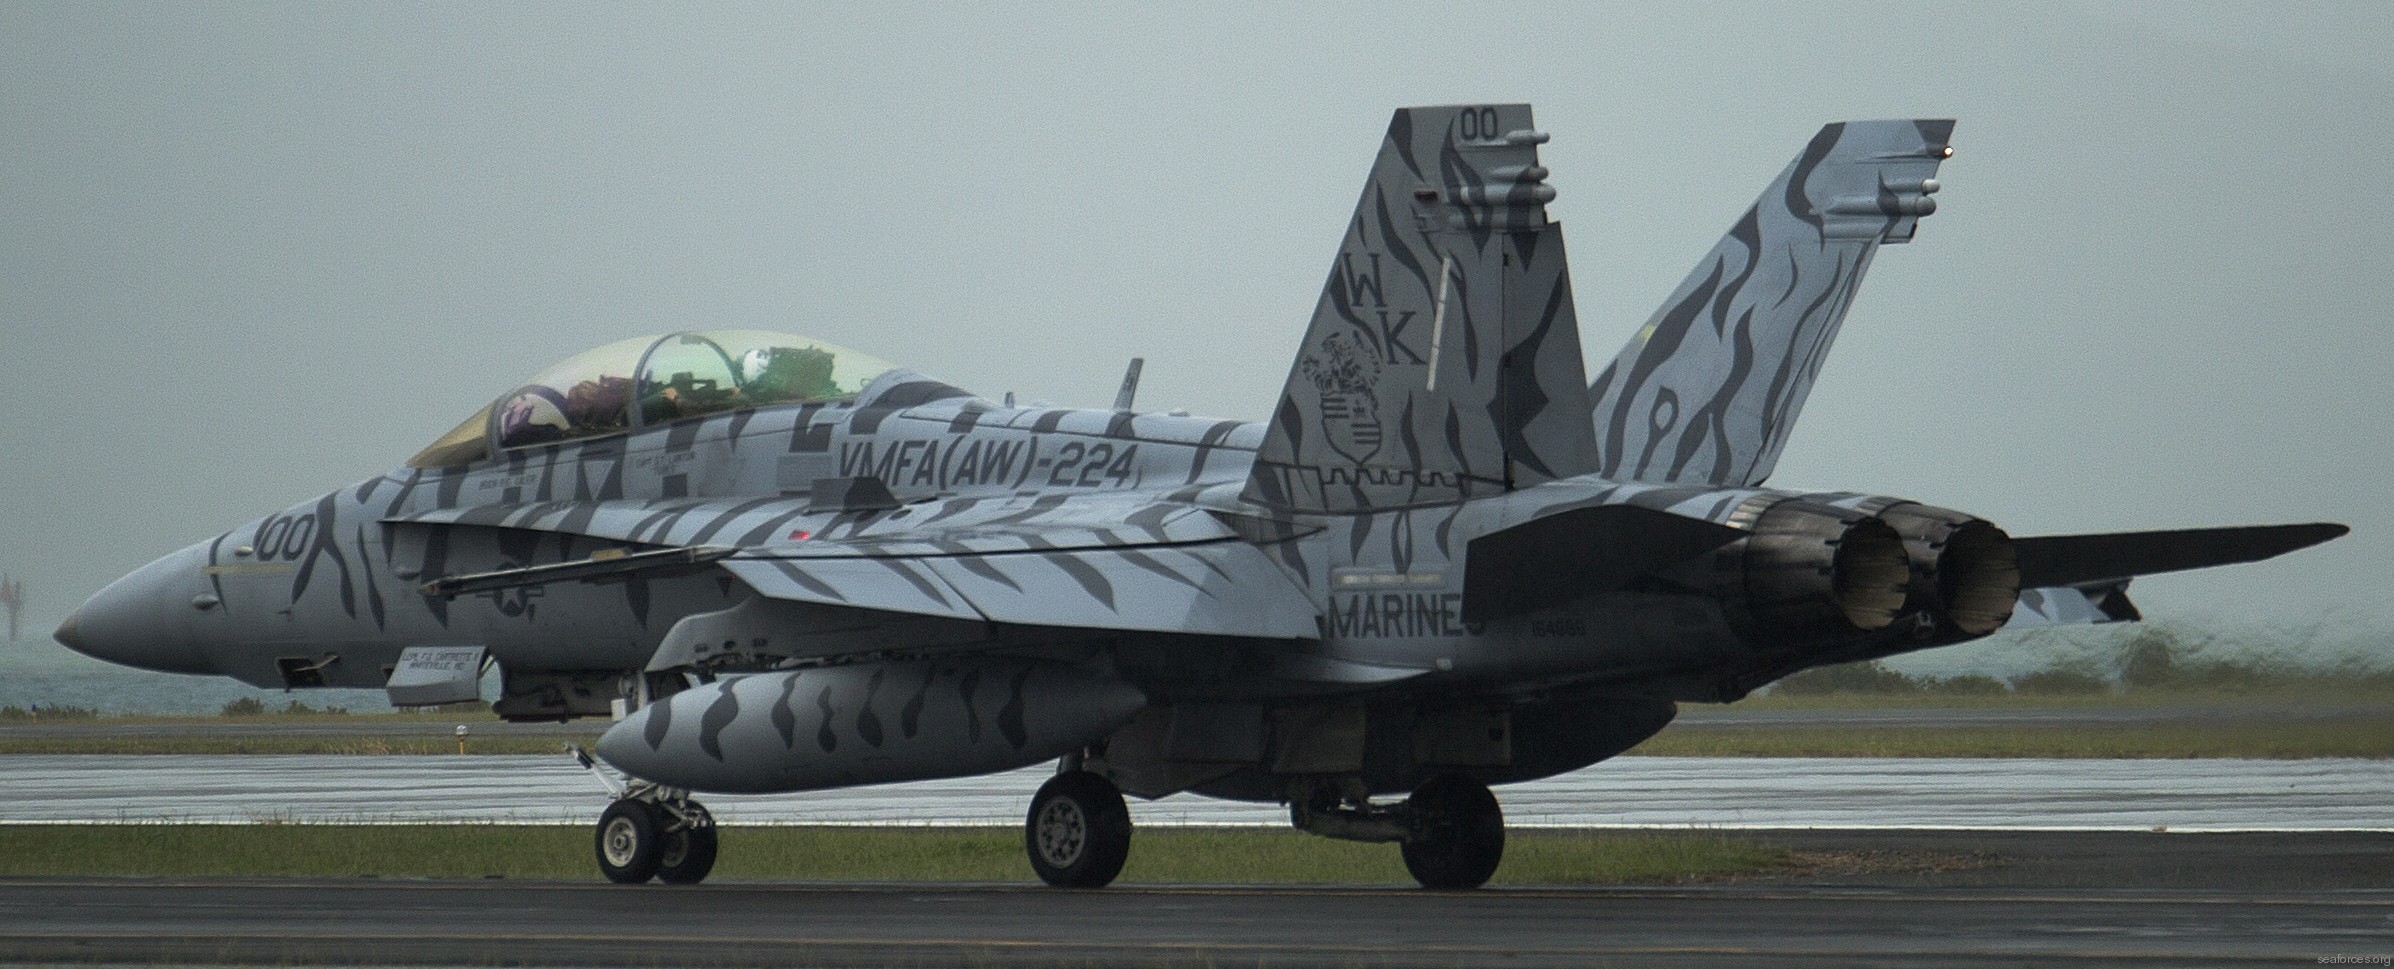 vmfa(aw)-224 bengals marine fighter attack squadron usmc f/a-18d hornet 25 mcas kaneohe bay hawaii